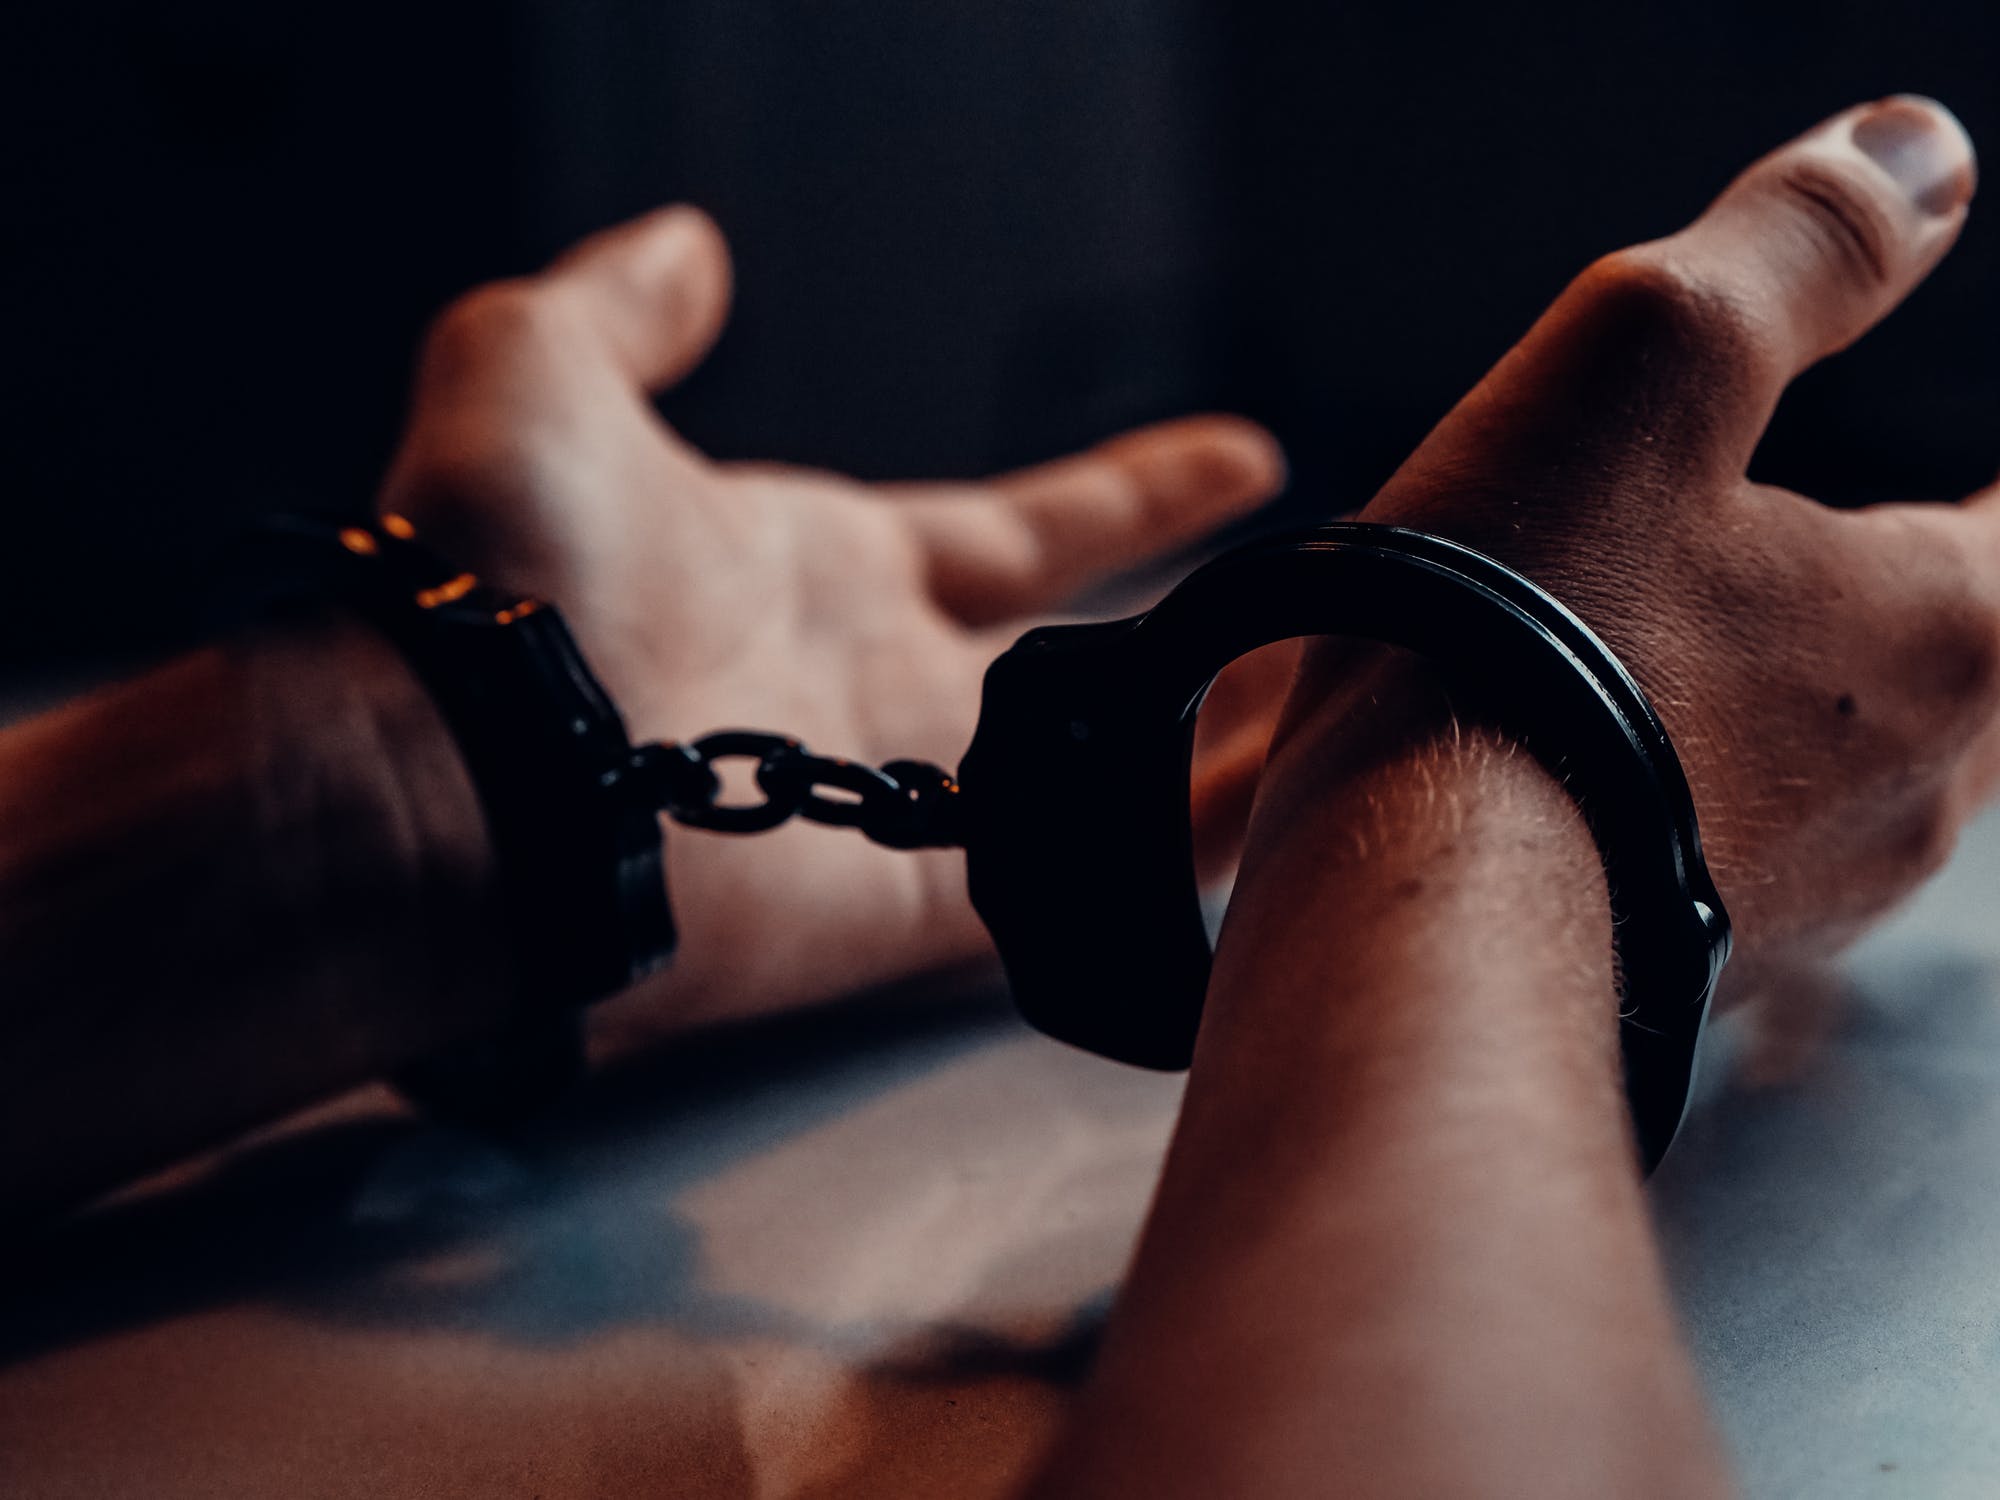 The criminal in handcuffs | Source: Pexels